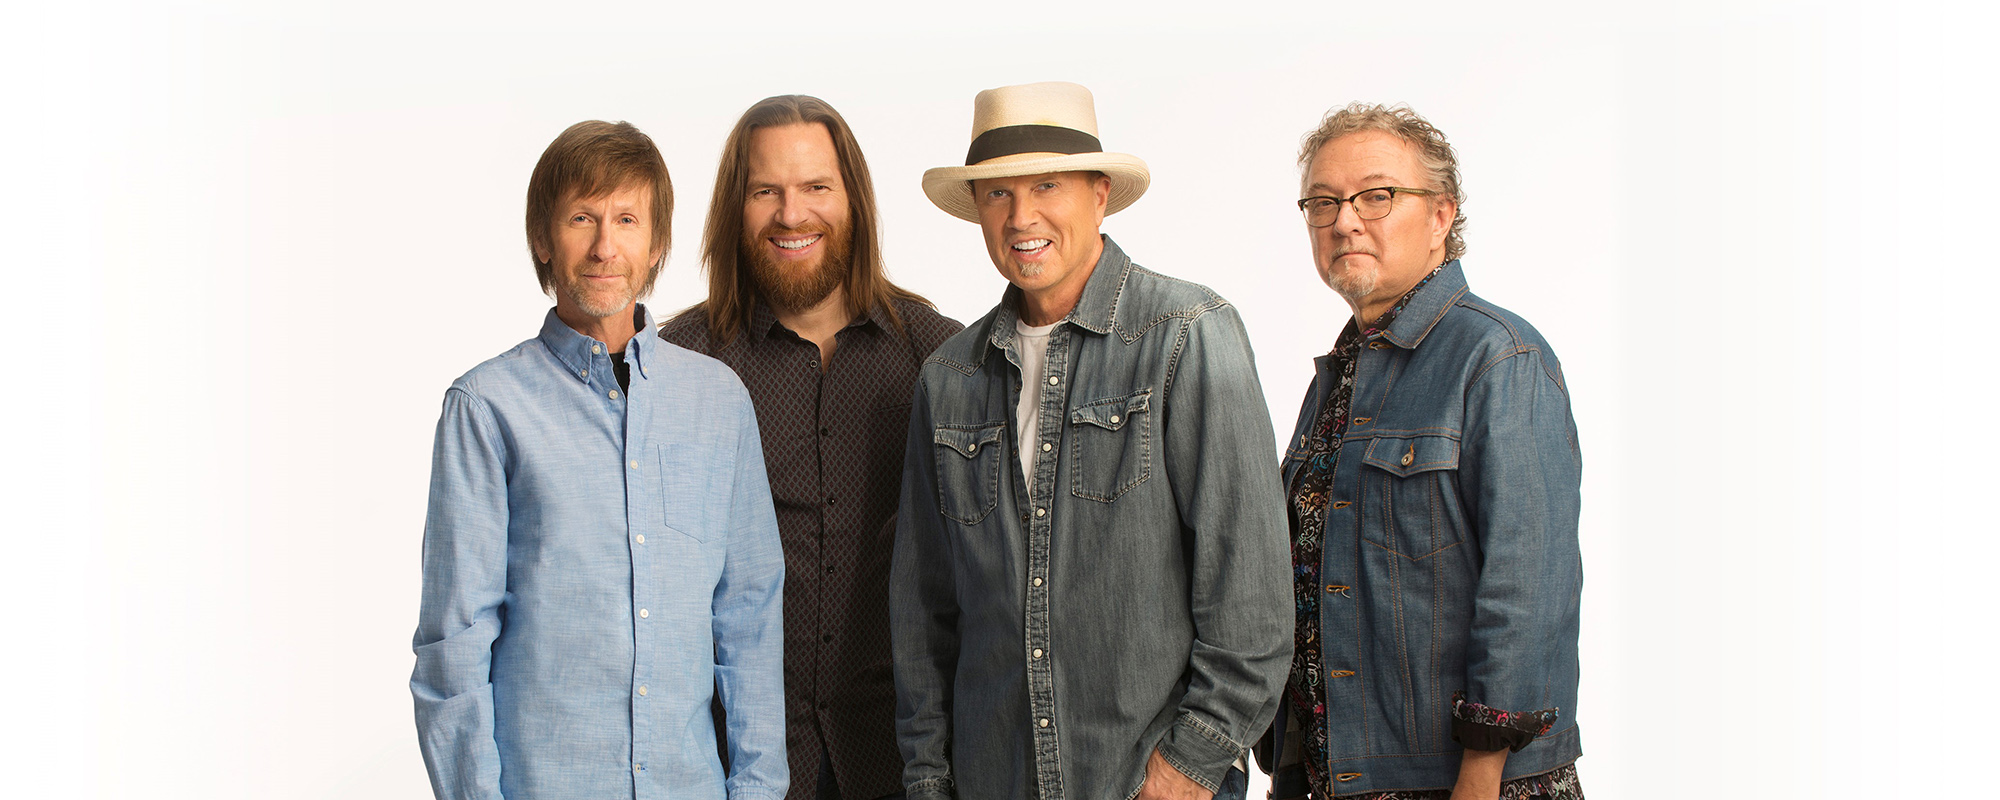 Sawyer Brown Releasing New Album Produced by Blake Shelton